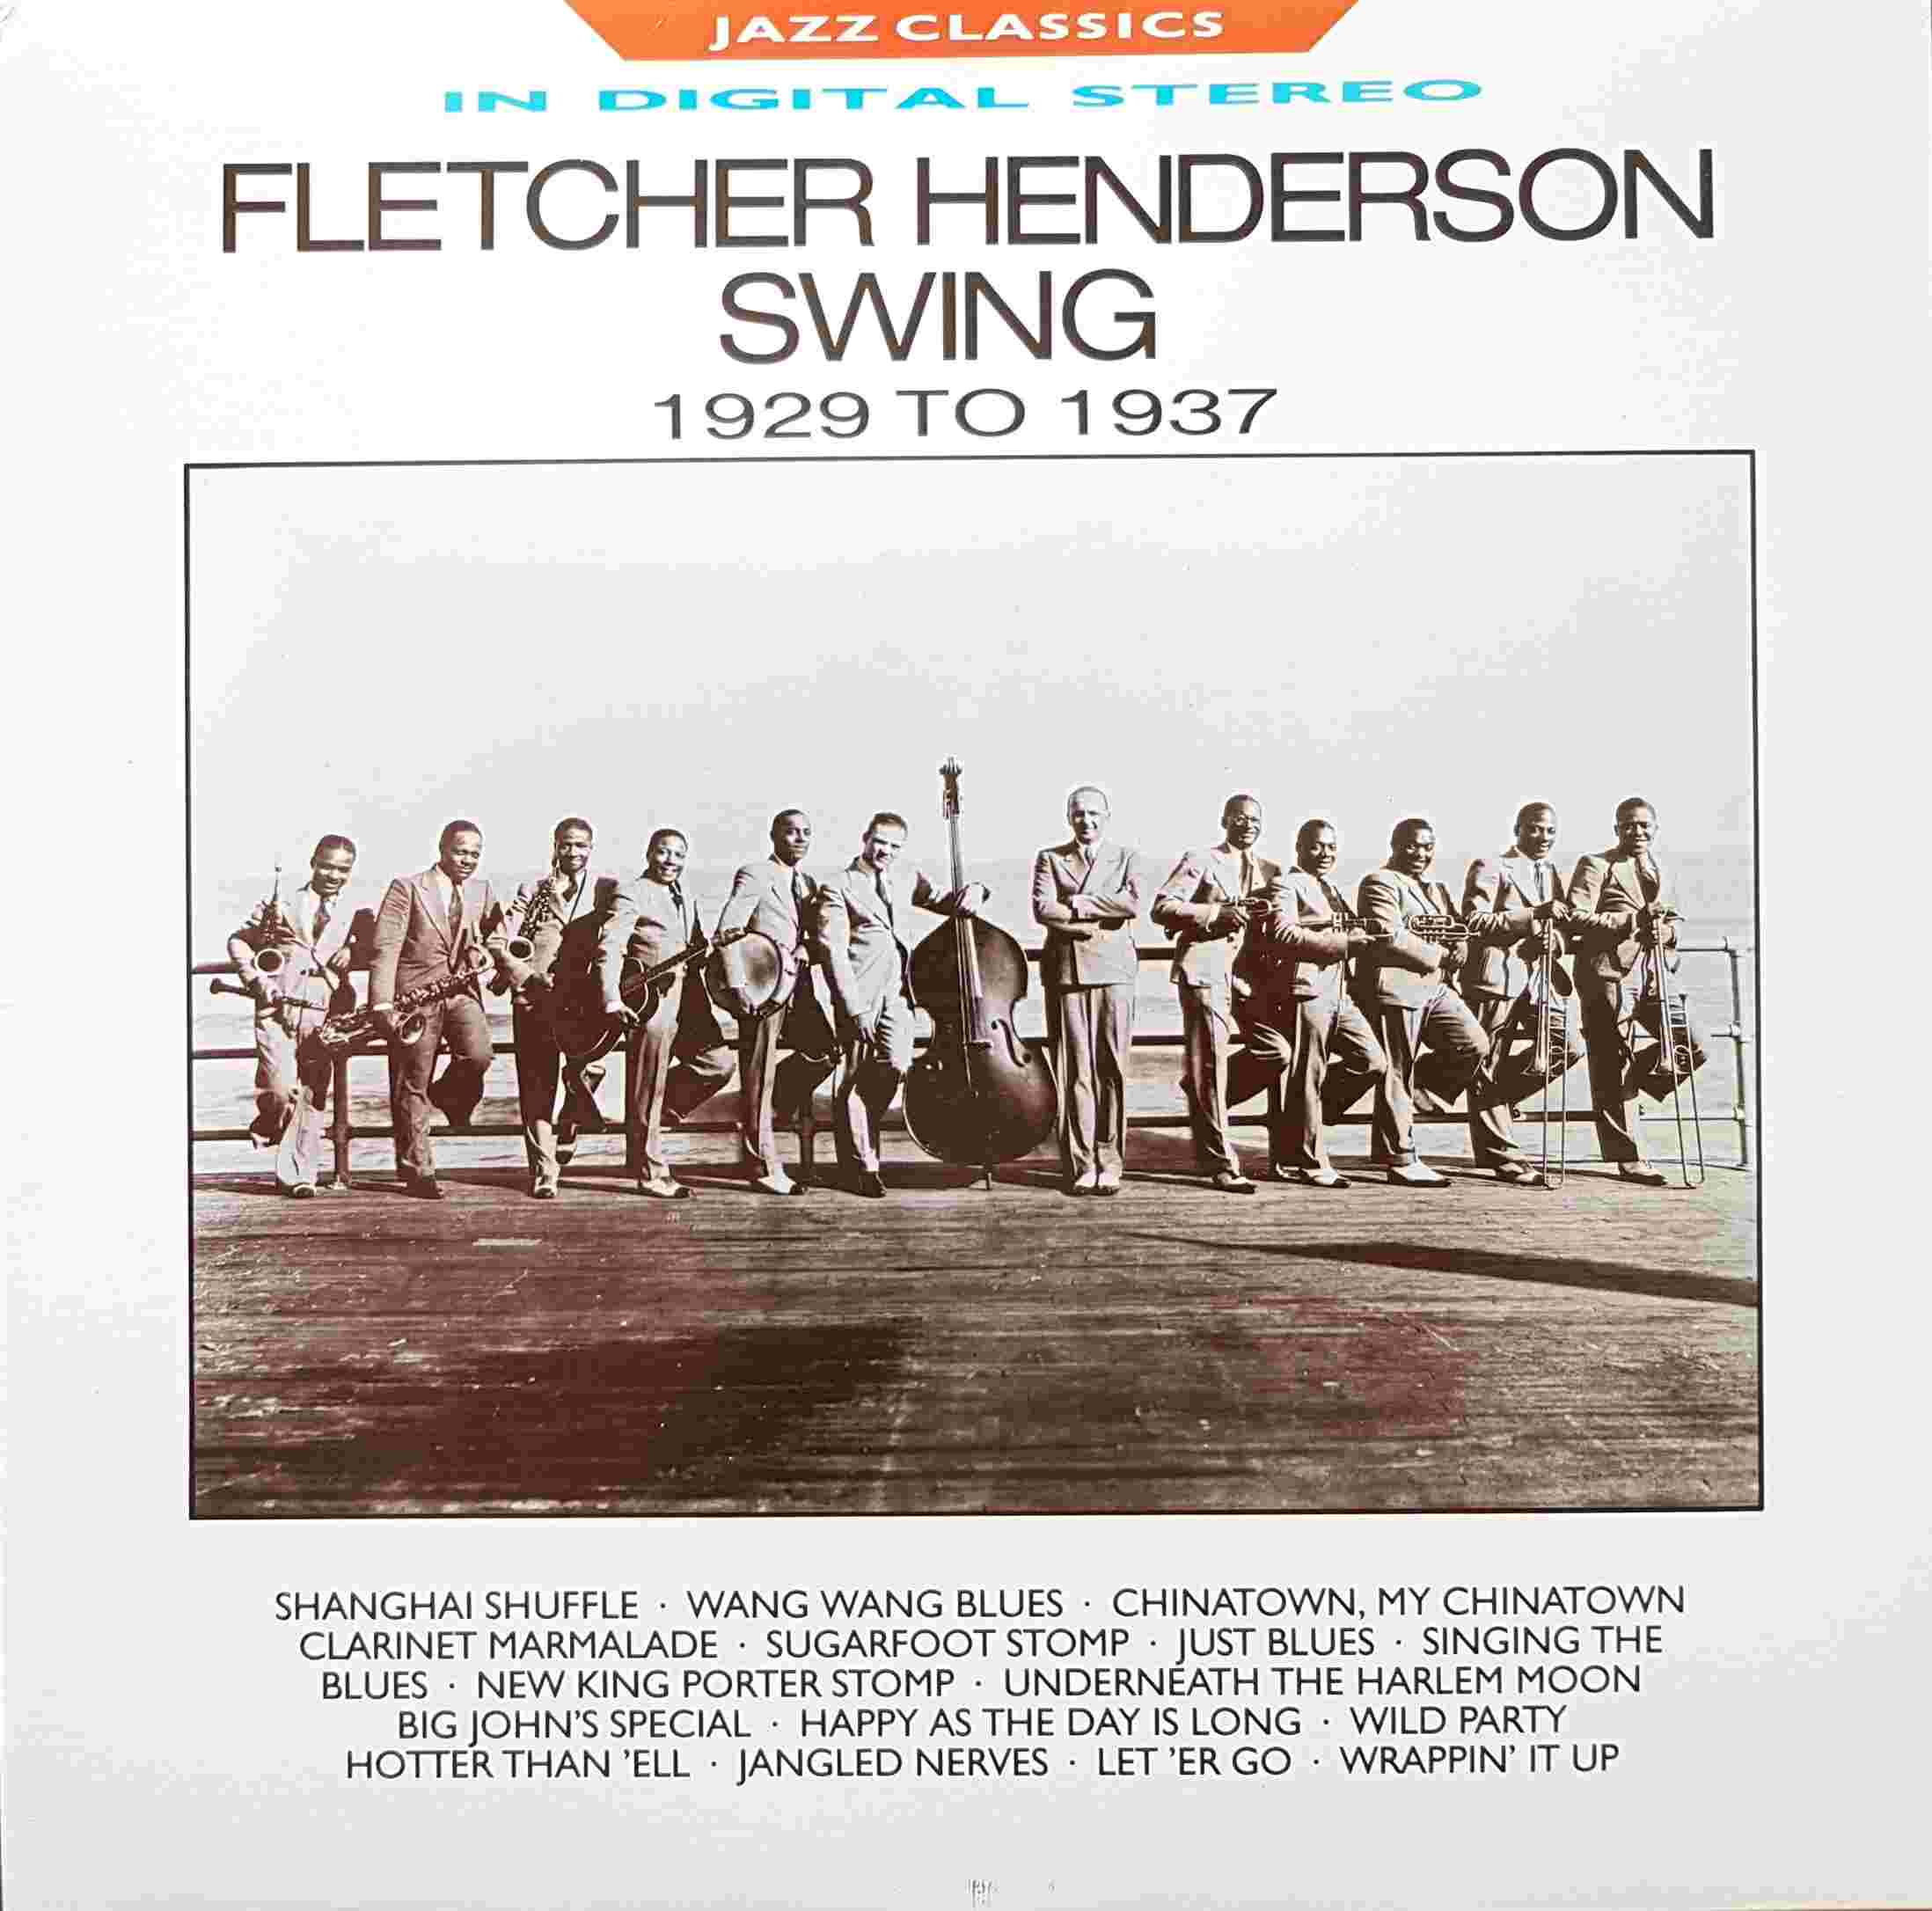 Picture of REB 682 Jazz classics - Fletcher Henderson Swing 1929 - 1937 by artist Fletcher Henderson  from the BBC albums - Records and Tapes library